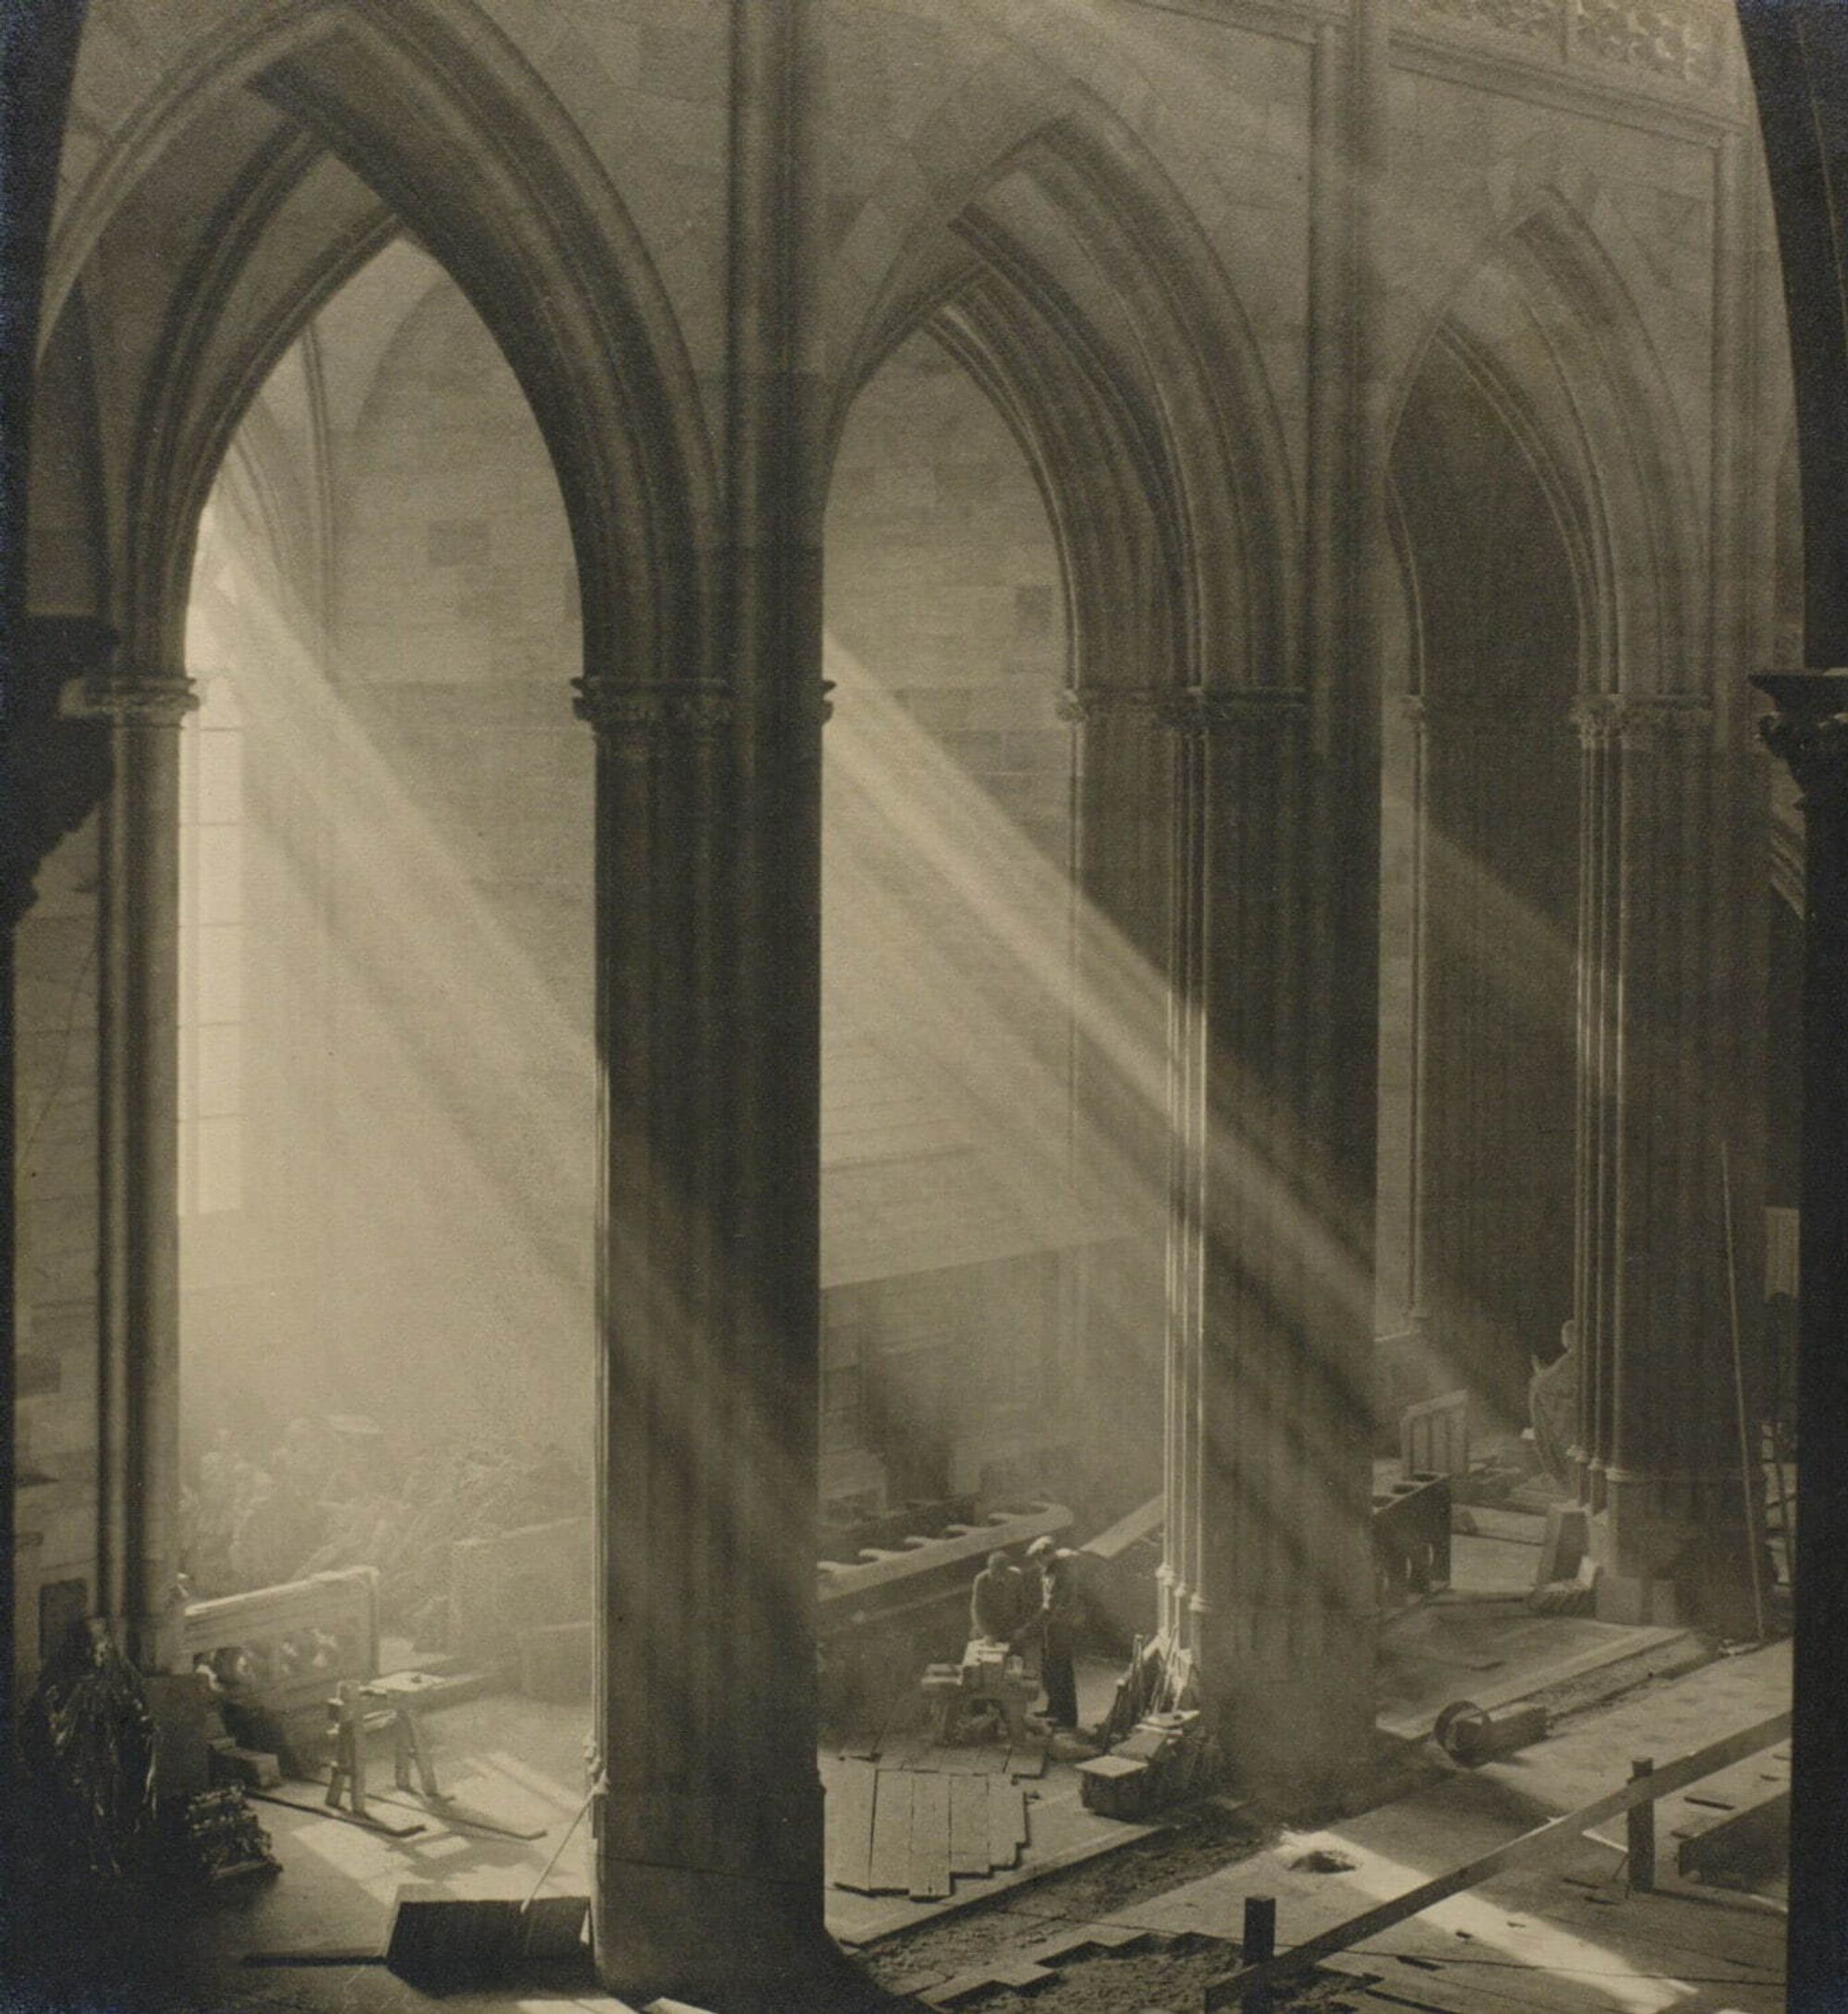 Josef Sudek, "View of the nave and down - south side of the new part of St. Vitus Cathedral", From the series of 'St. Vitus', 1928, Gelatin silver print, Collection of Tokyo Photographic Art Museum